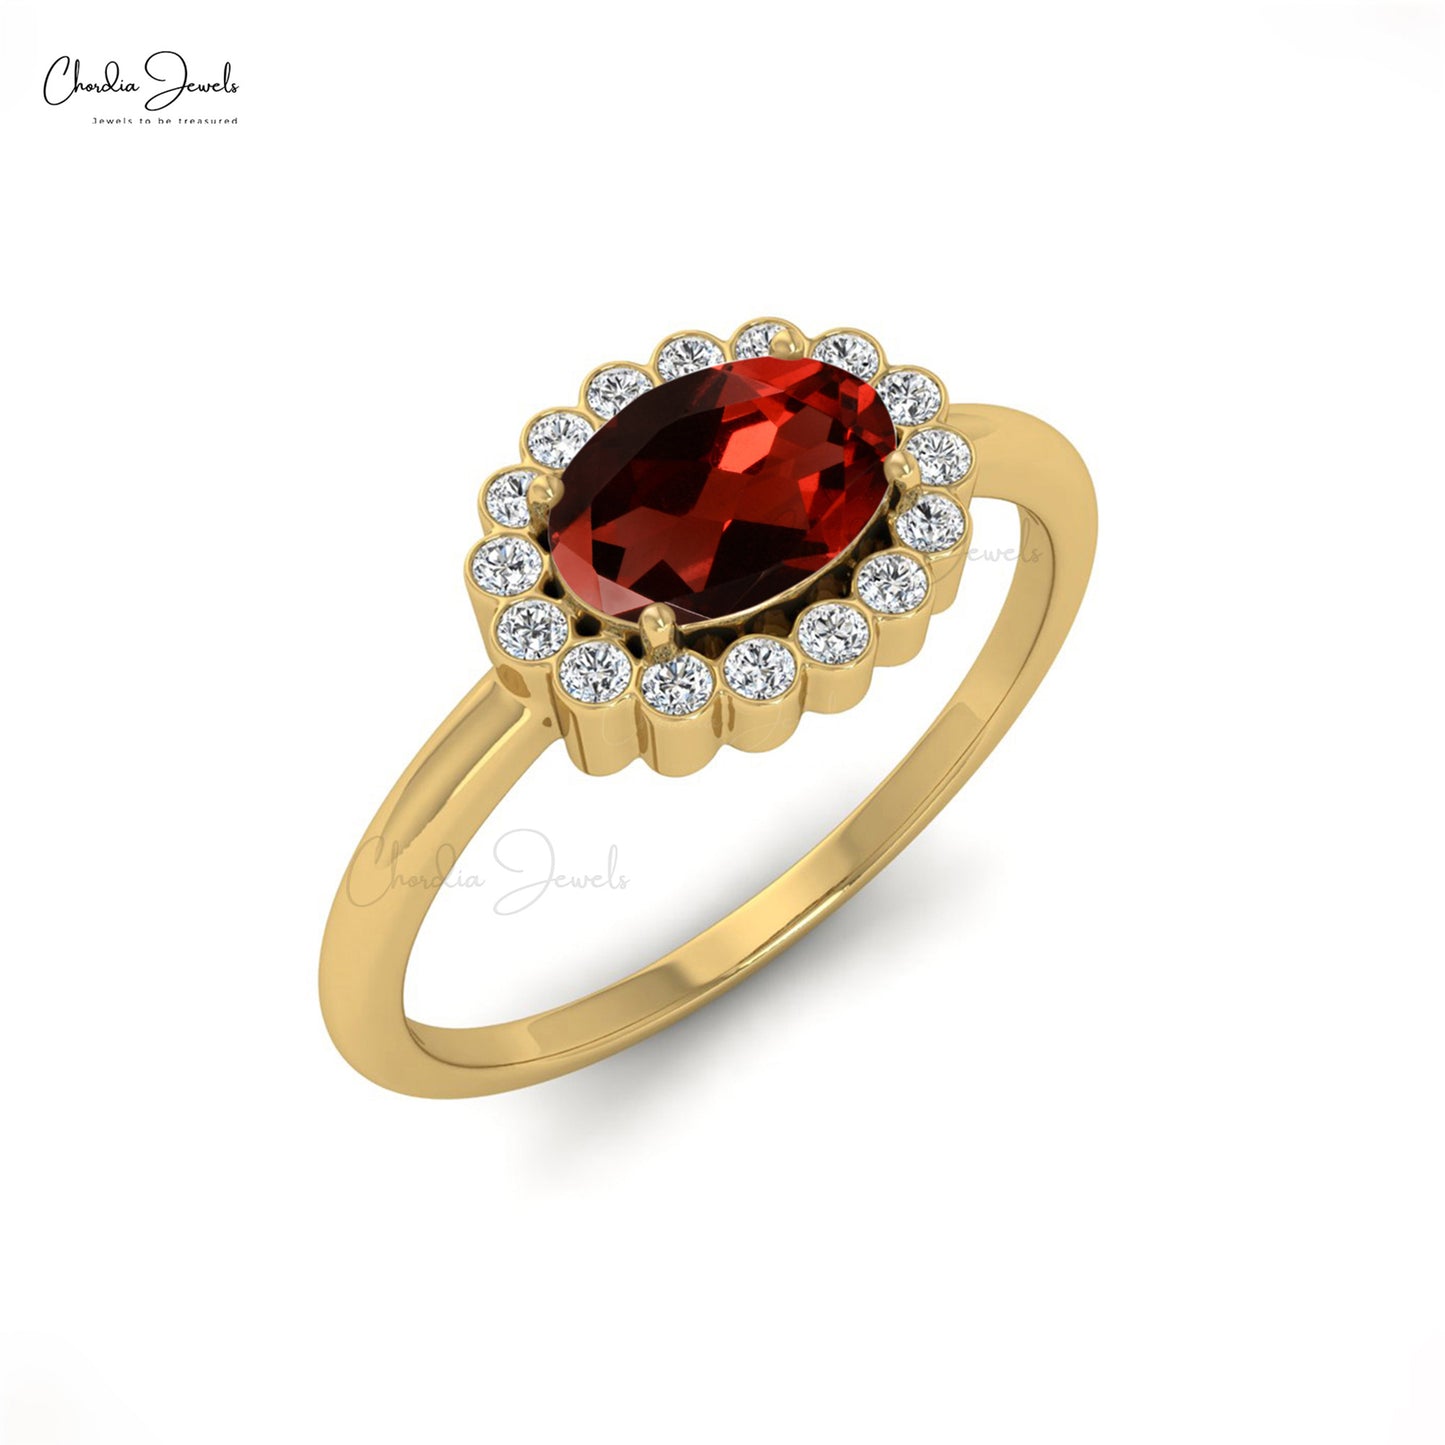 Oval Shaped 7x5mm Garnet Diamond Halo Ring for Her